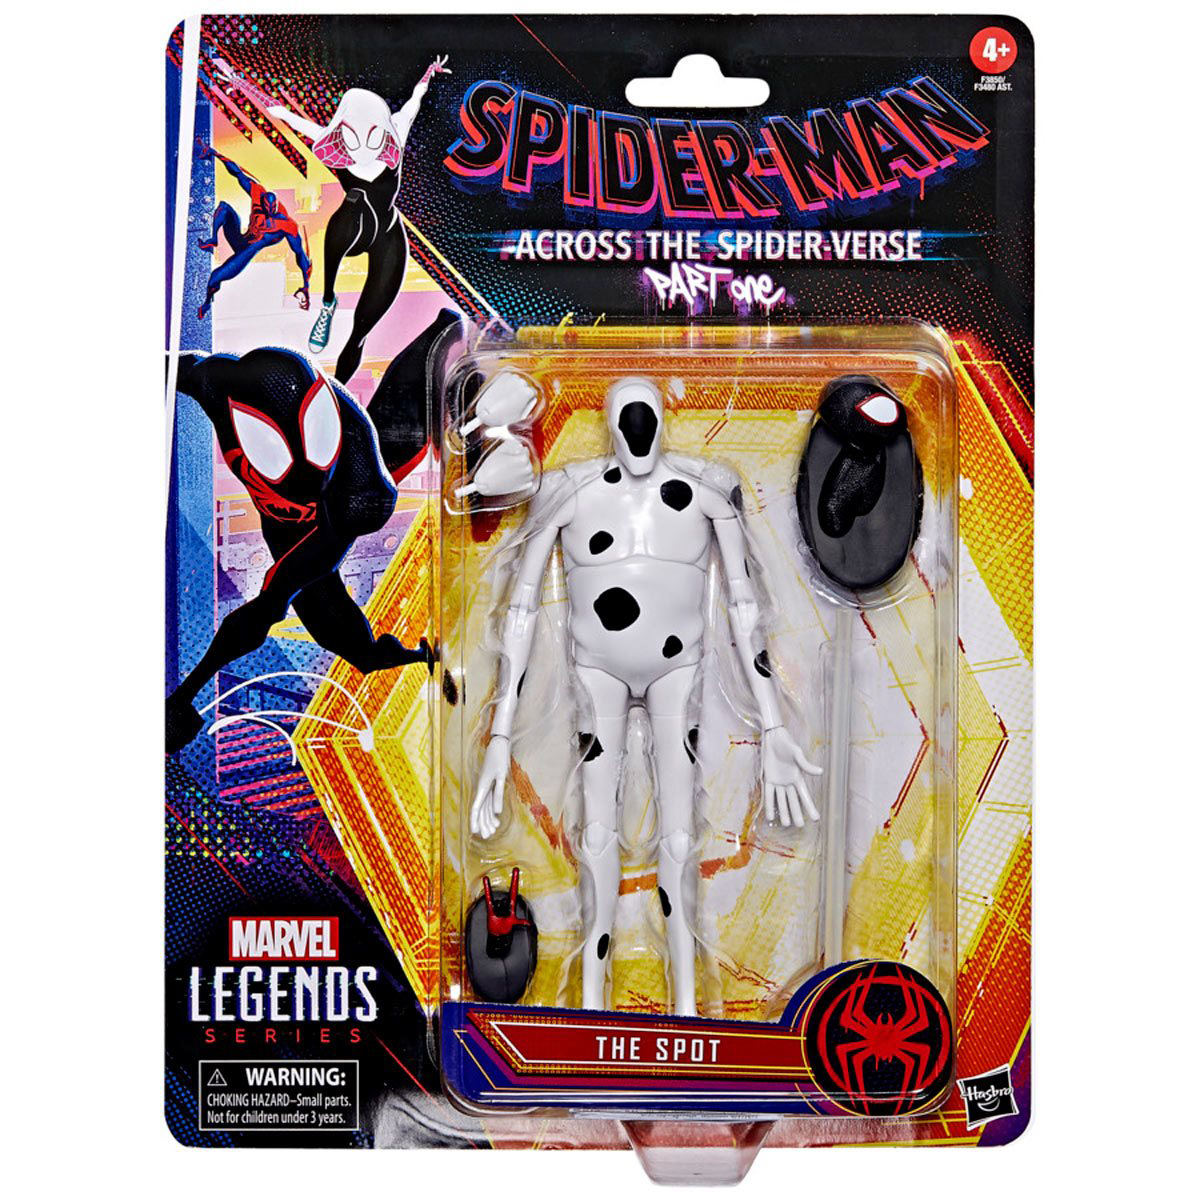 The-Spot-Marvel-Legends-Spider-Man-Across-the-Spider-Verse-Action-Figure-1